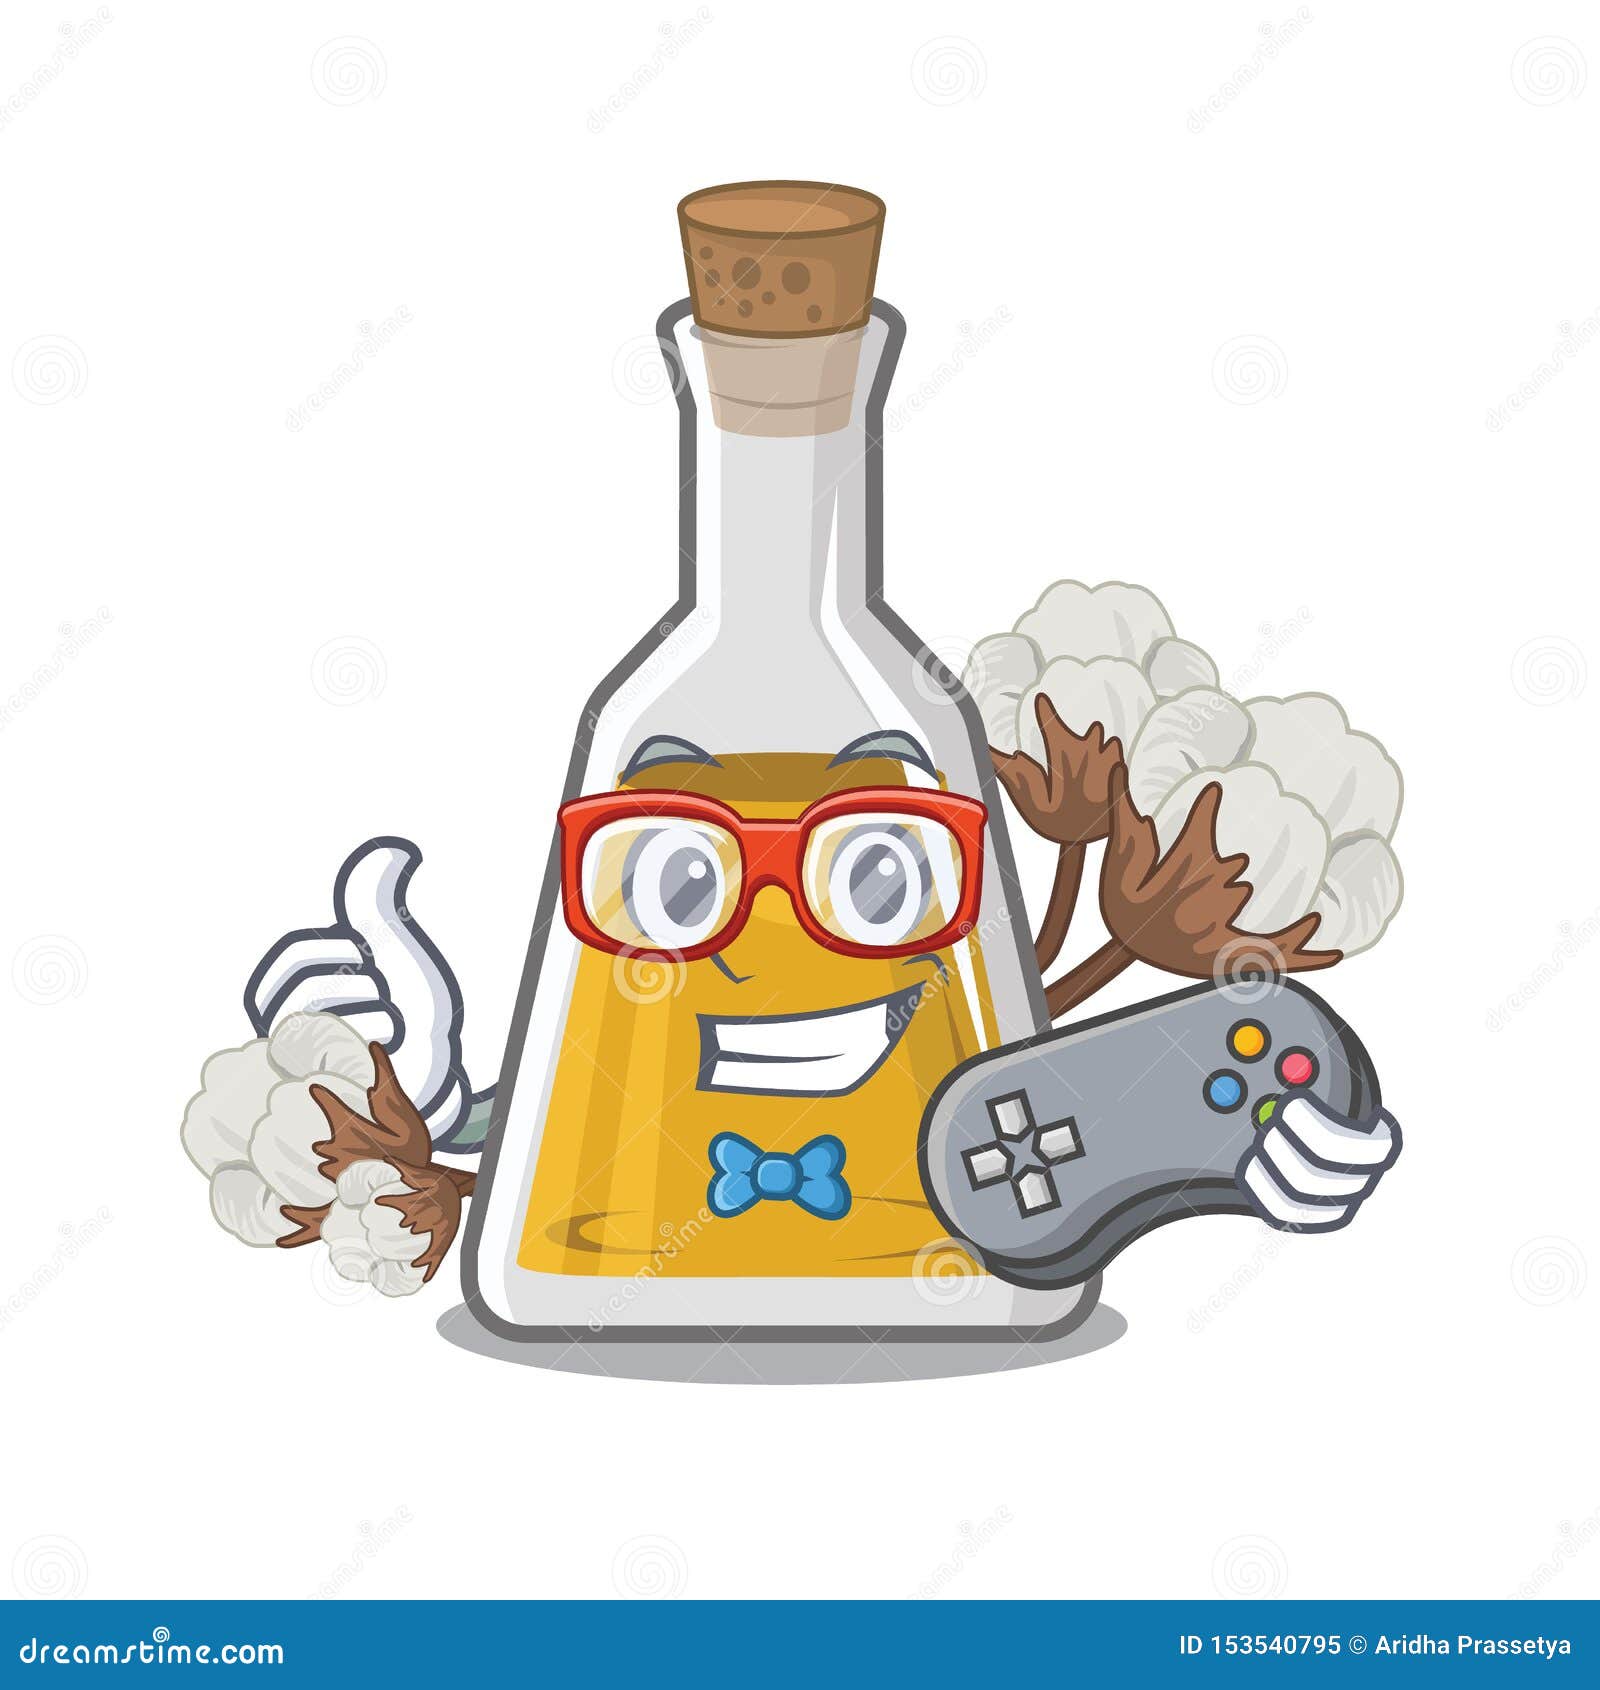 gamer cottonseed oil in the cartoon 